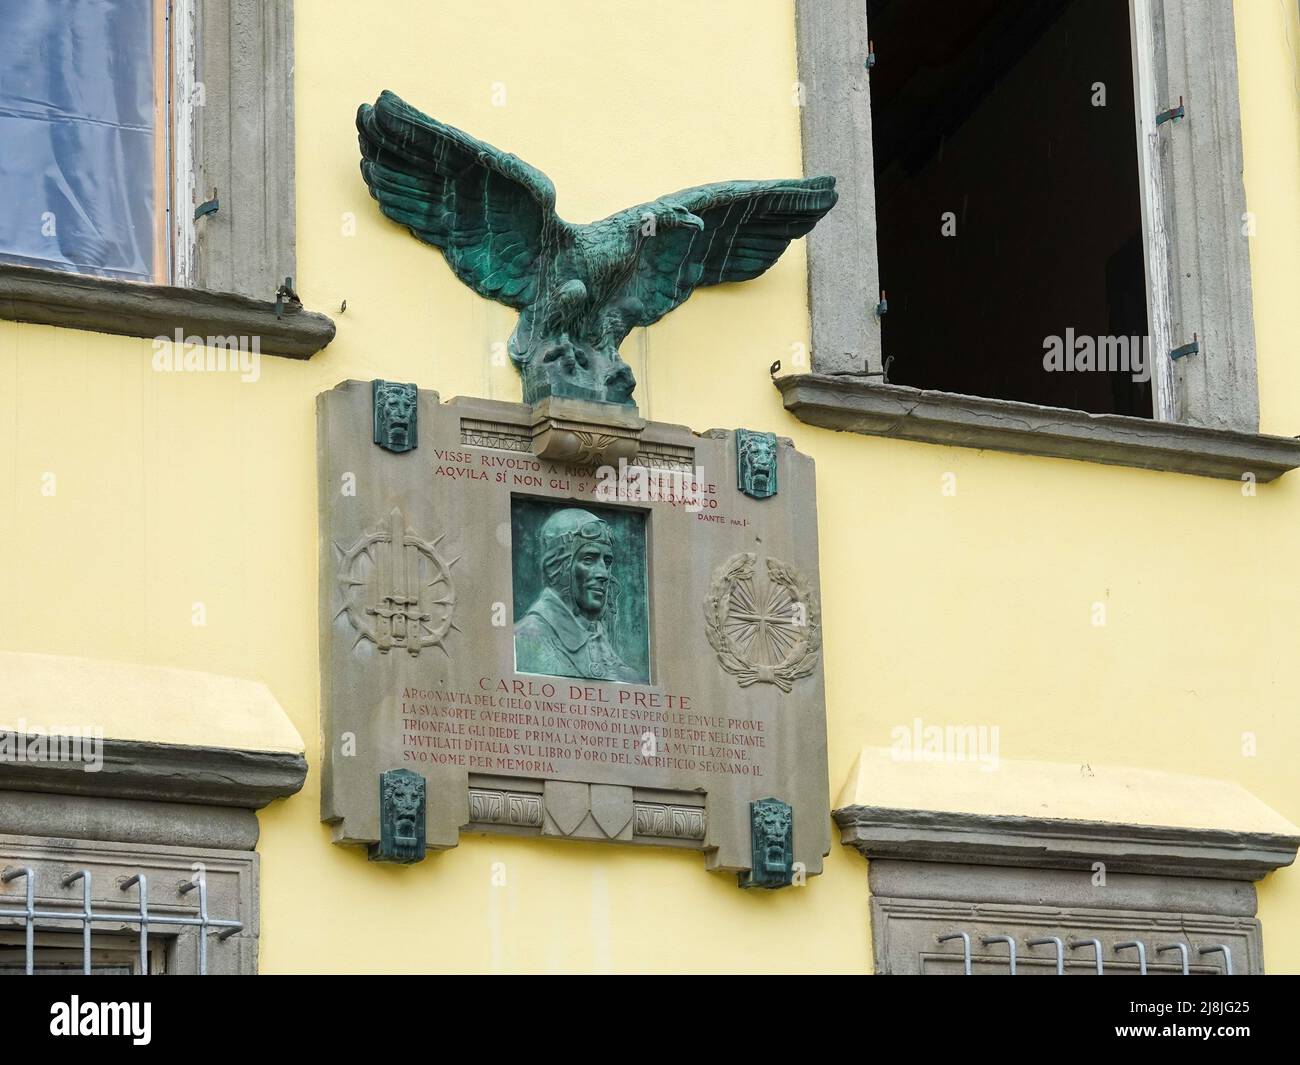 Memorial plaque with a bronze relief portrait, on the top a console with a bronze eagle. Memorial for aviator, Carlo del Prete, Lucca, Italy. Stock Photo